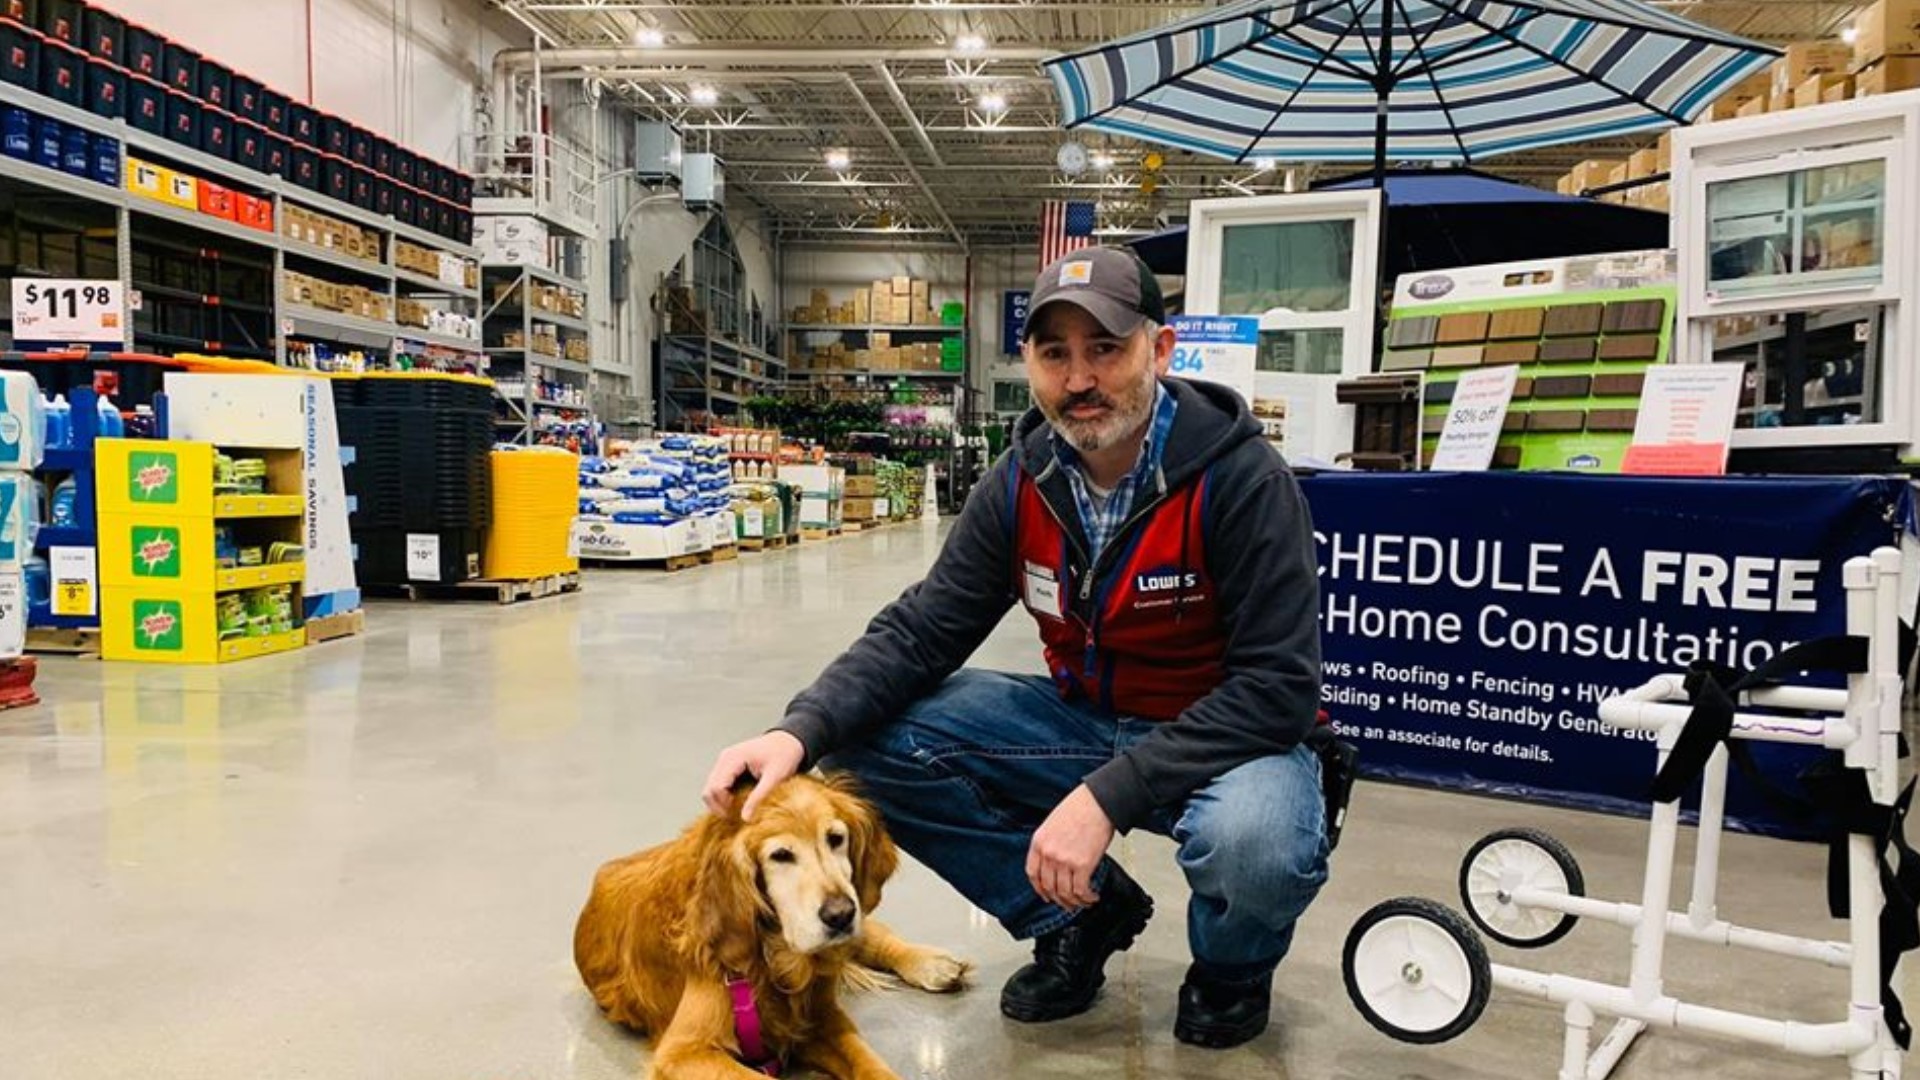 An injured dog who was found limping on a highway in Shelby is getting a second chance at life thanks to a local family, and a Lowe's employee.